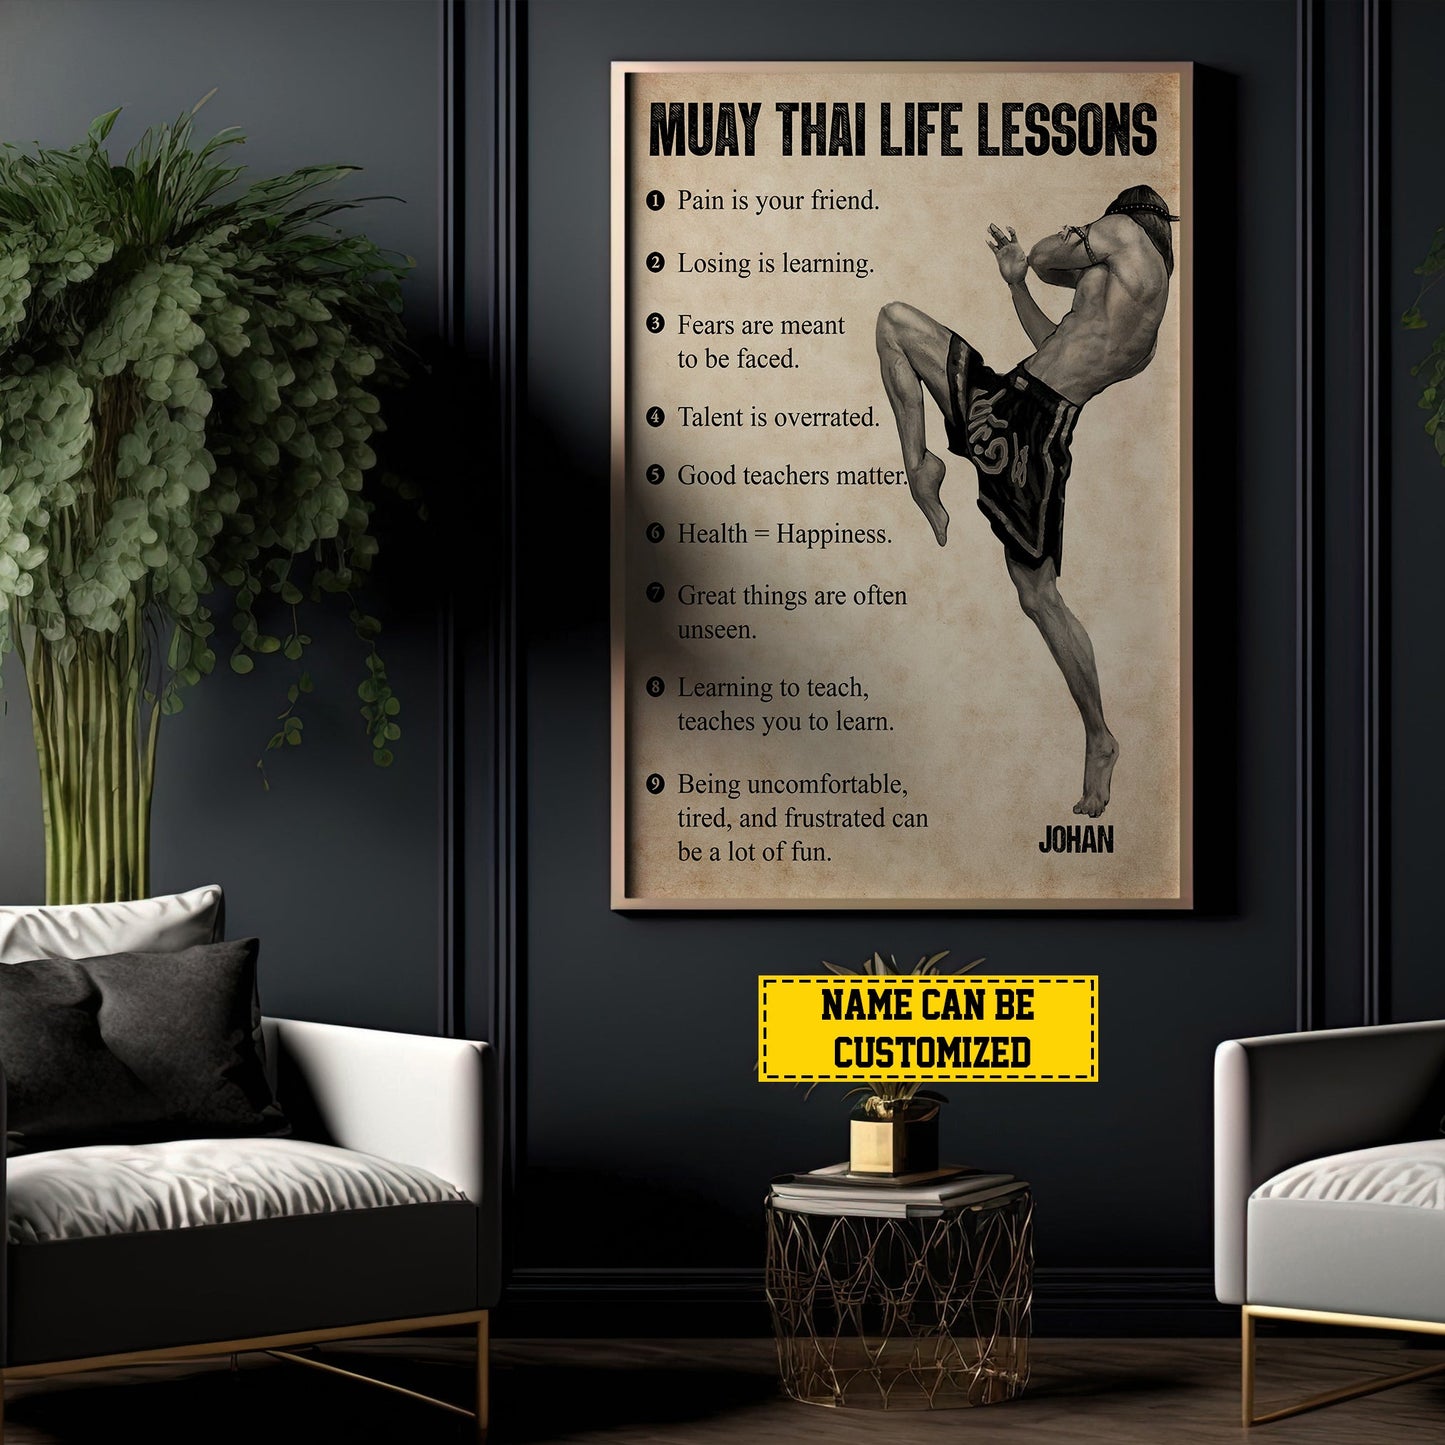 Muay Thai Life Lessons, Personalized Motivational Muay Thai Canvas Painting, Inspirational Quotes Wall Art Decor, Poster Gift For Muay Thai Lovers